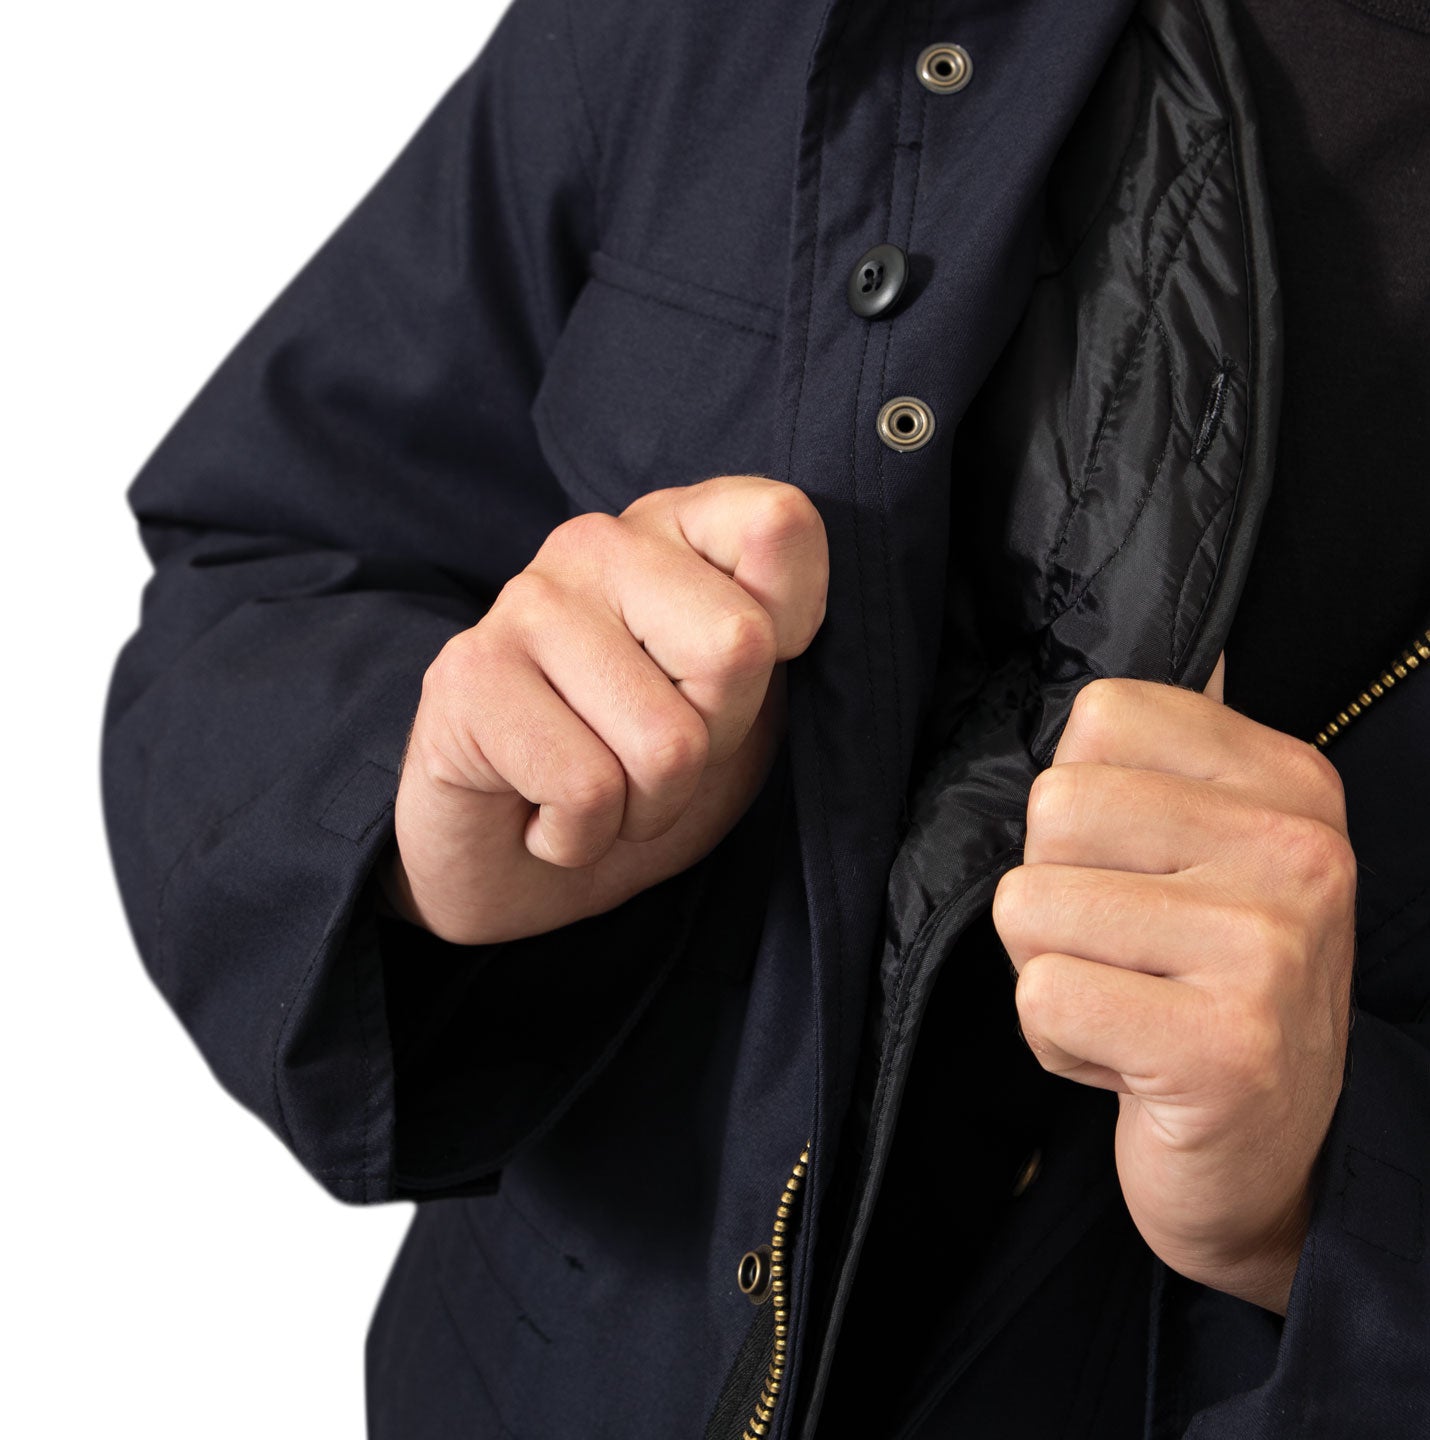 M-65 Field Jacket with Removeable Liner